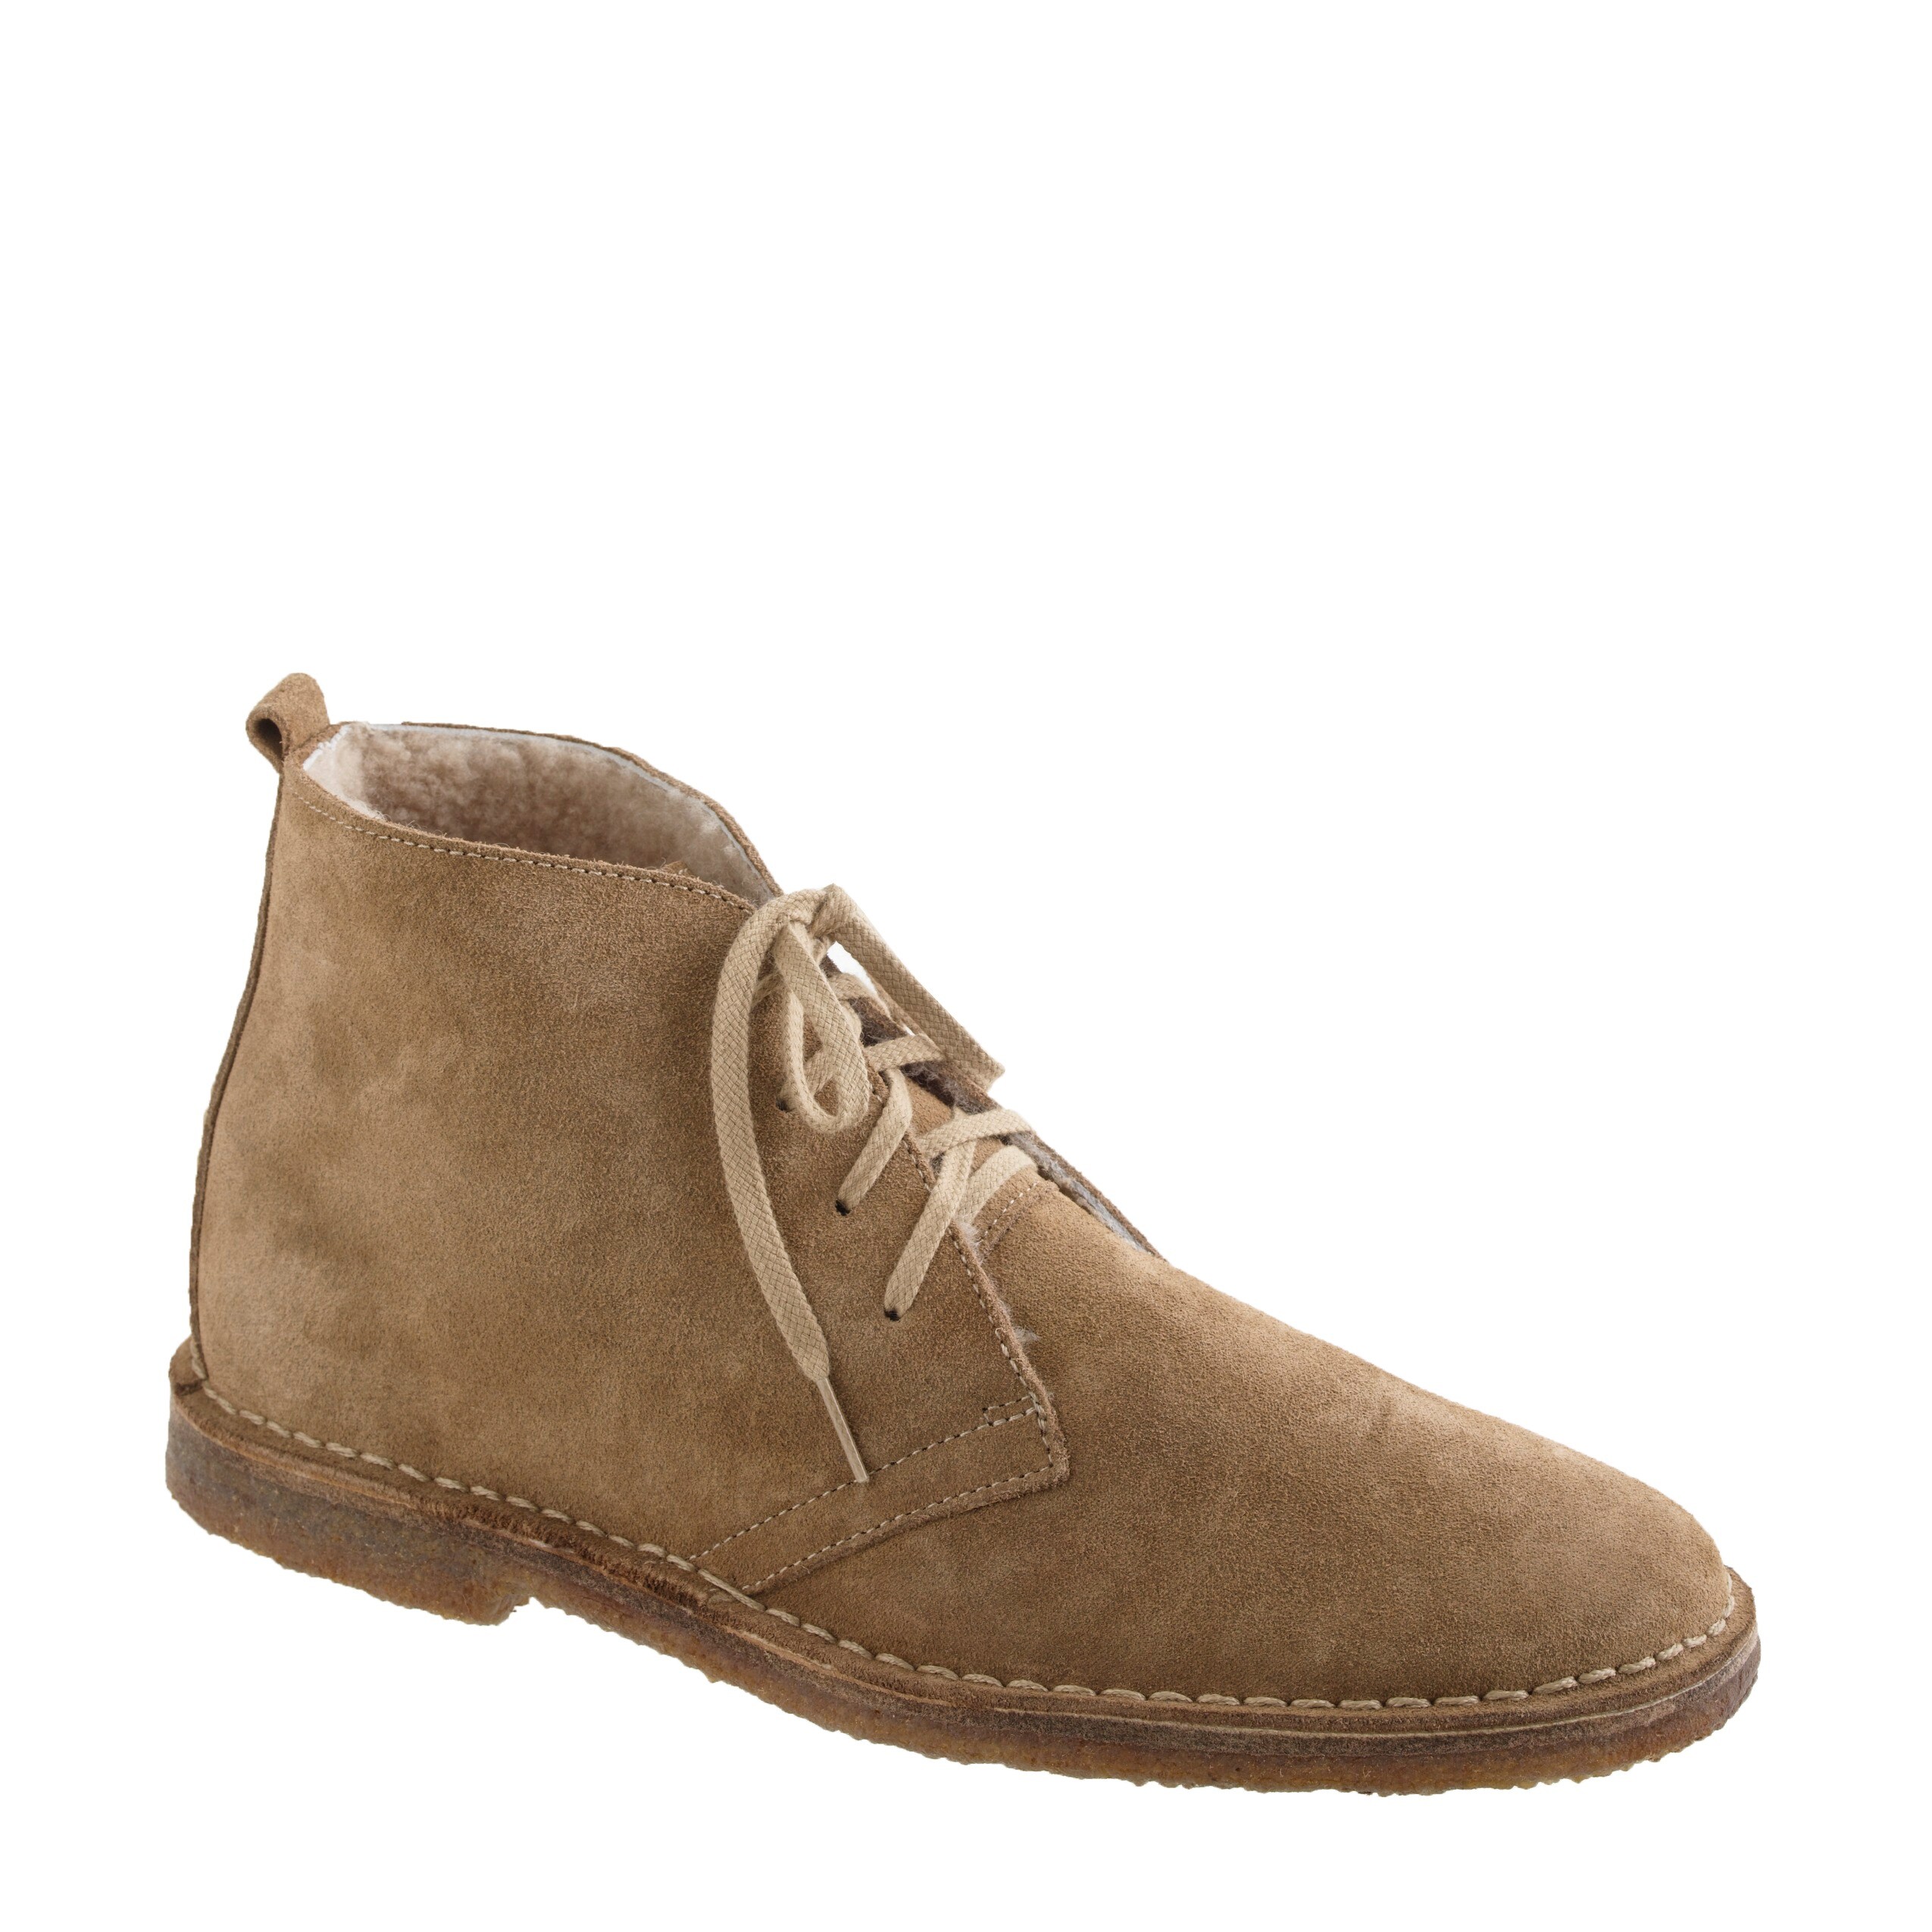 Classic MacAlister boots in shearling-lined suede : Men boots | J.Crew